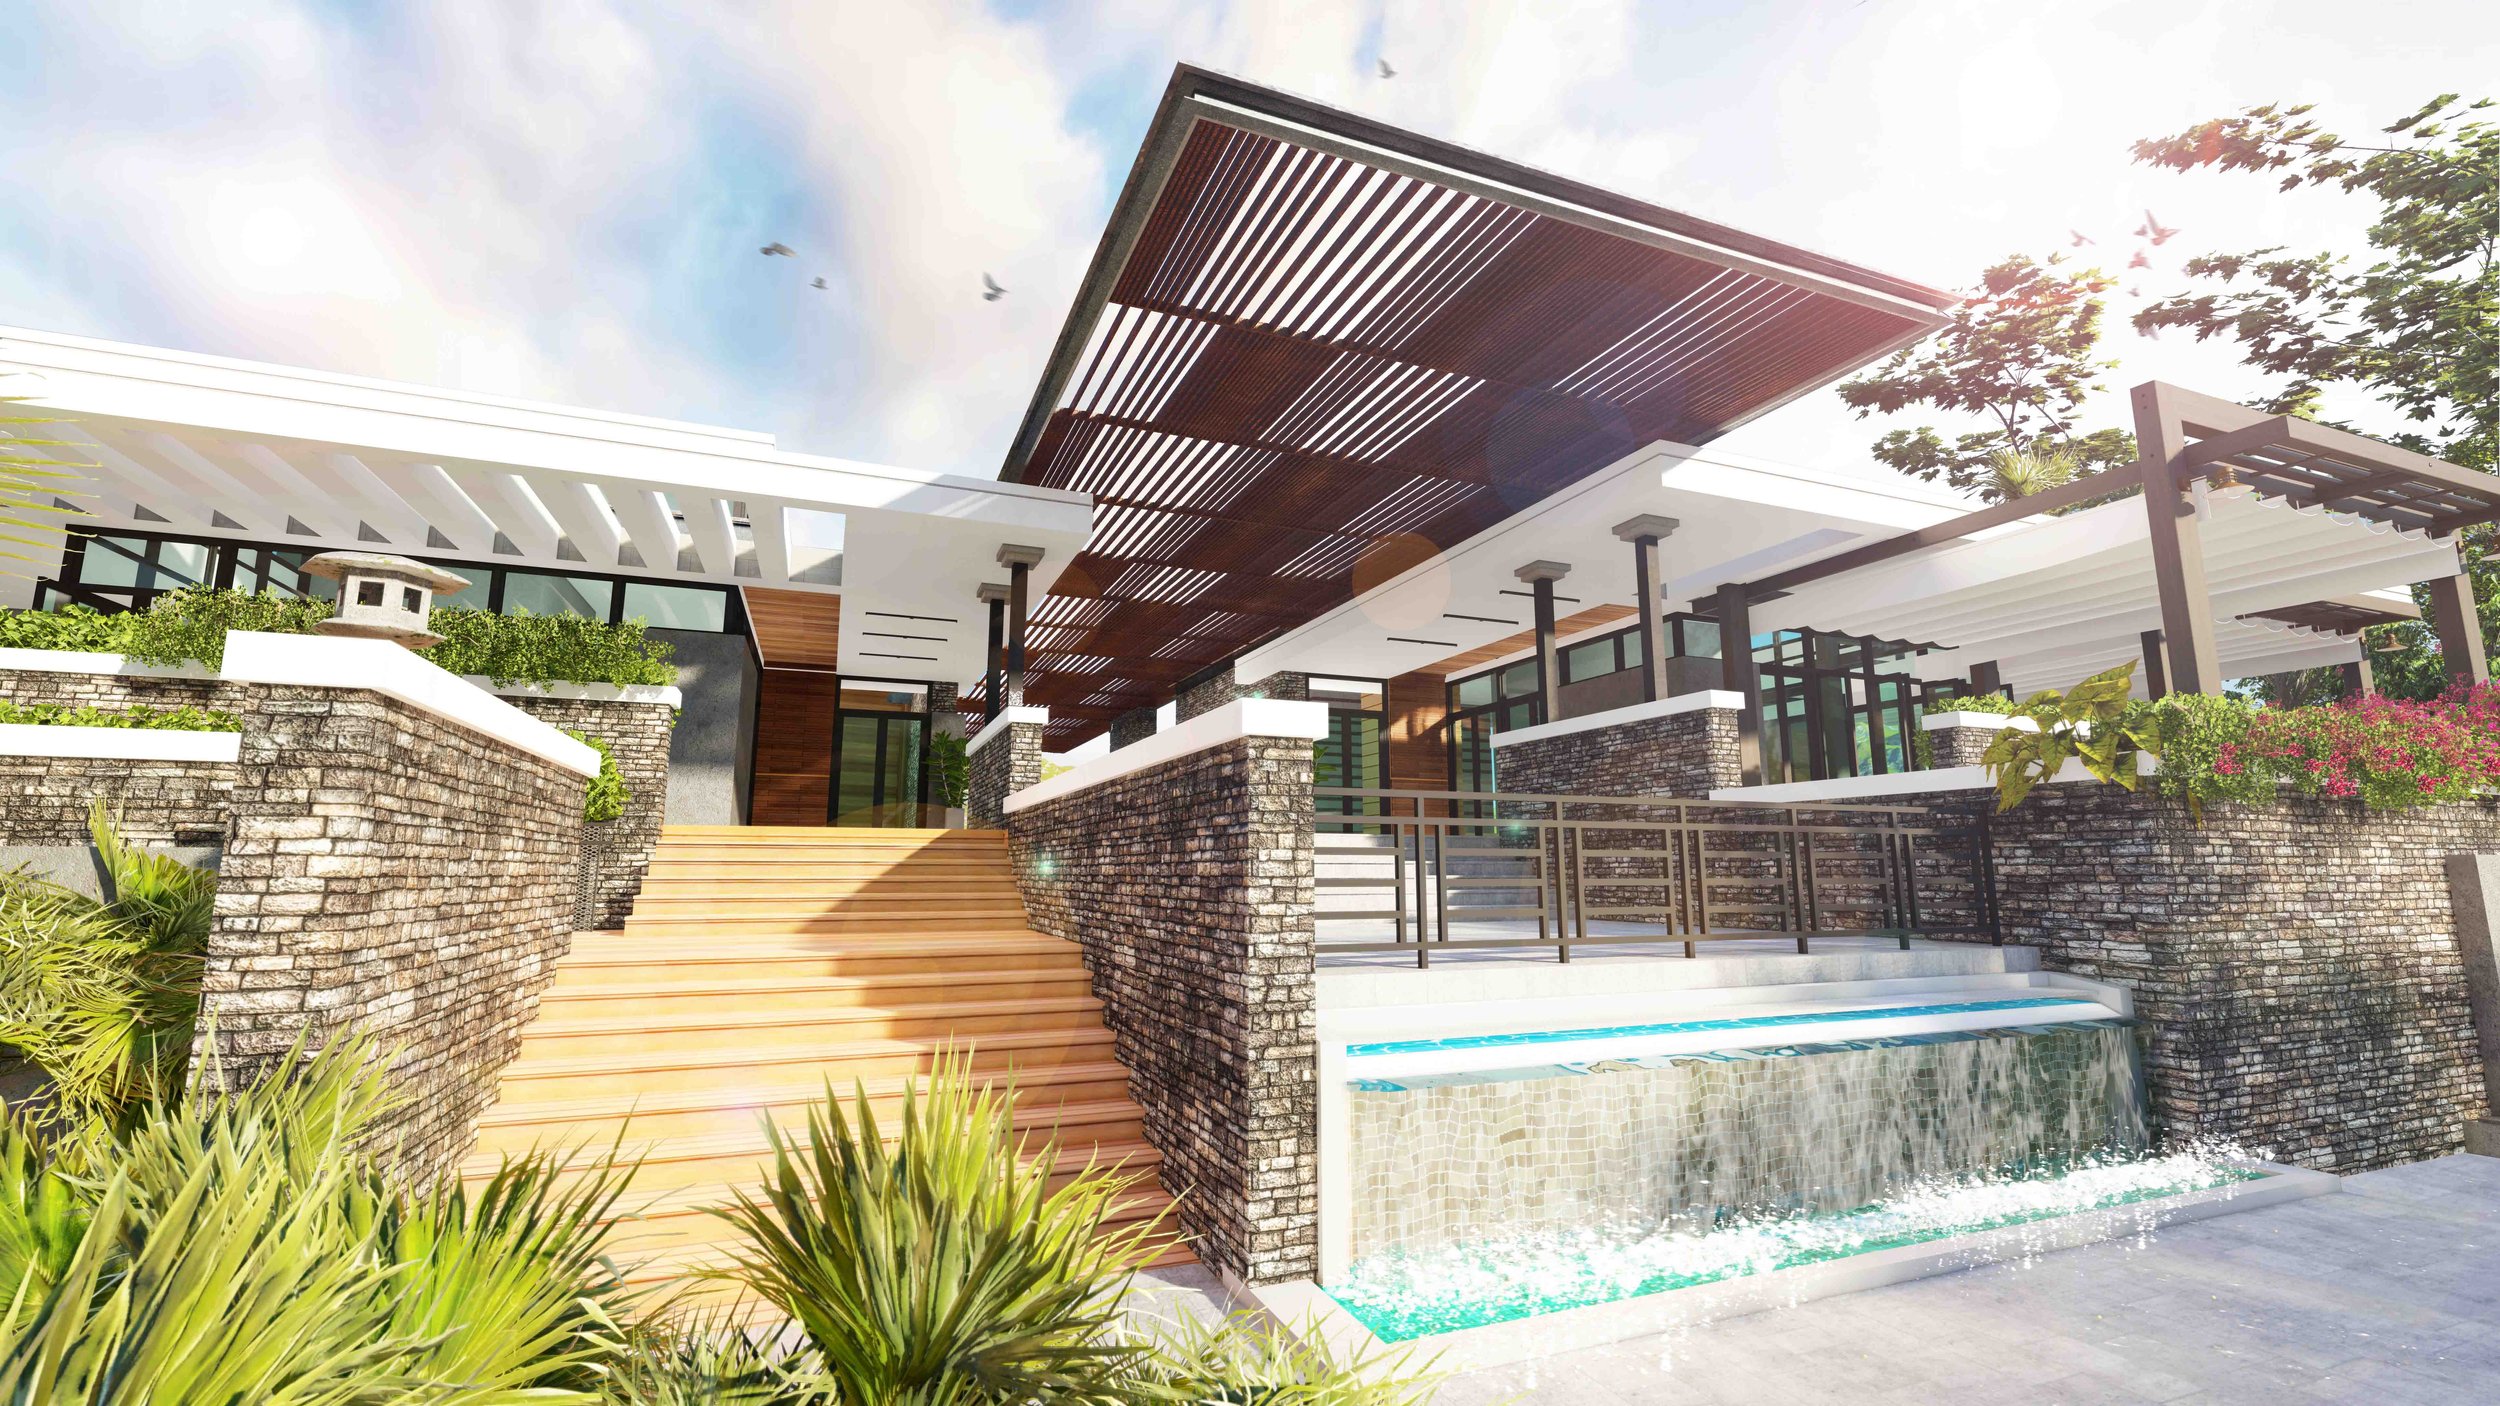  Conceptual rendering of a Mountain Spa Retreat project. 